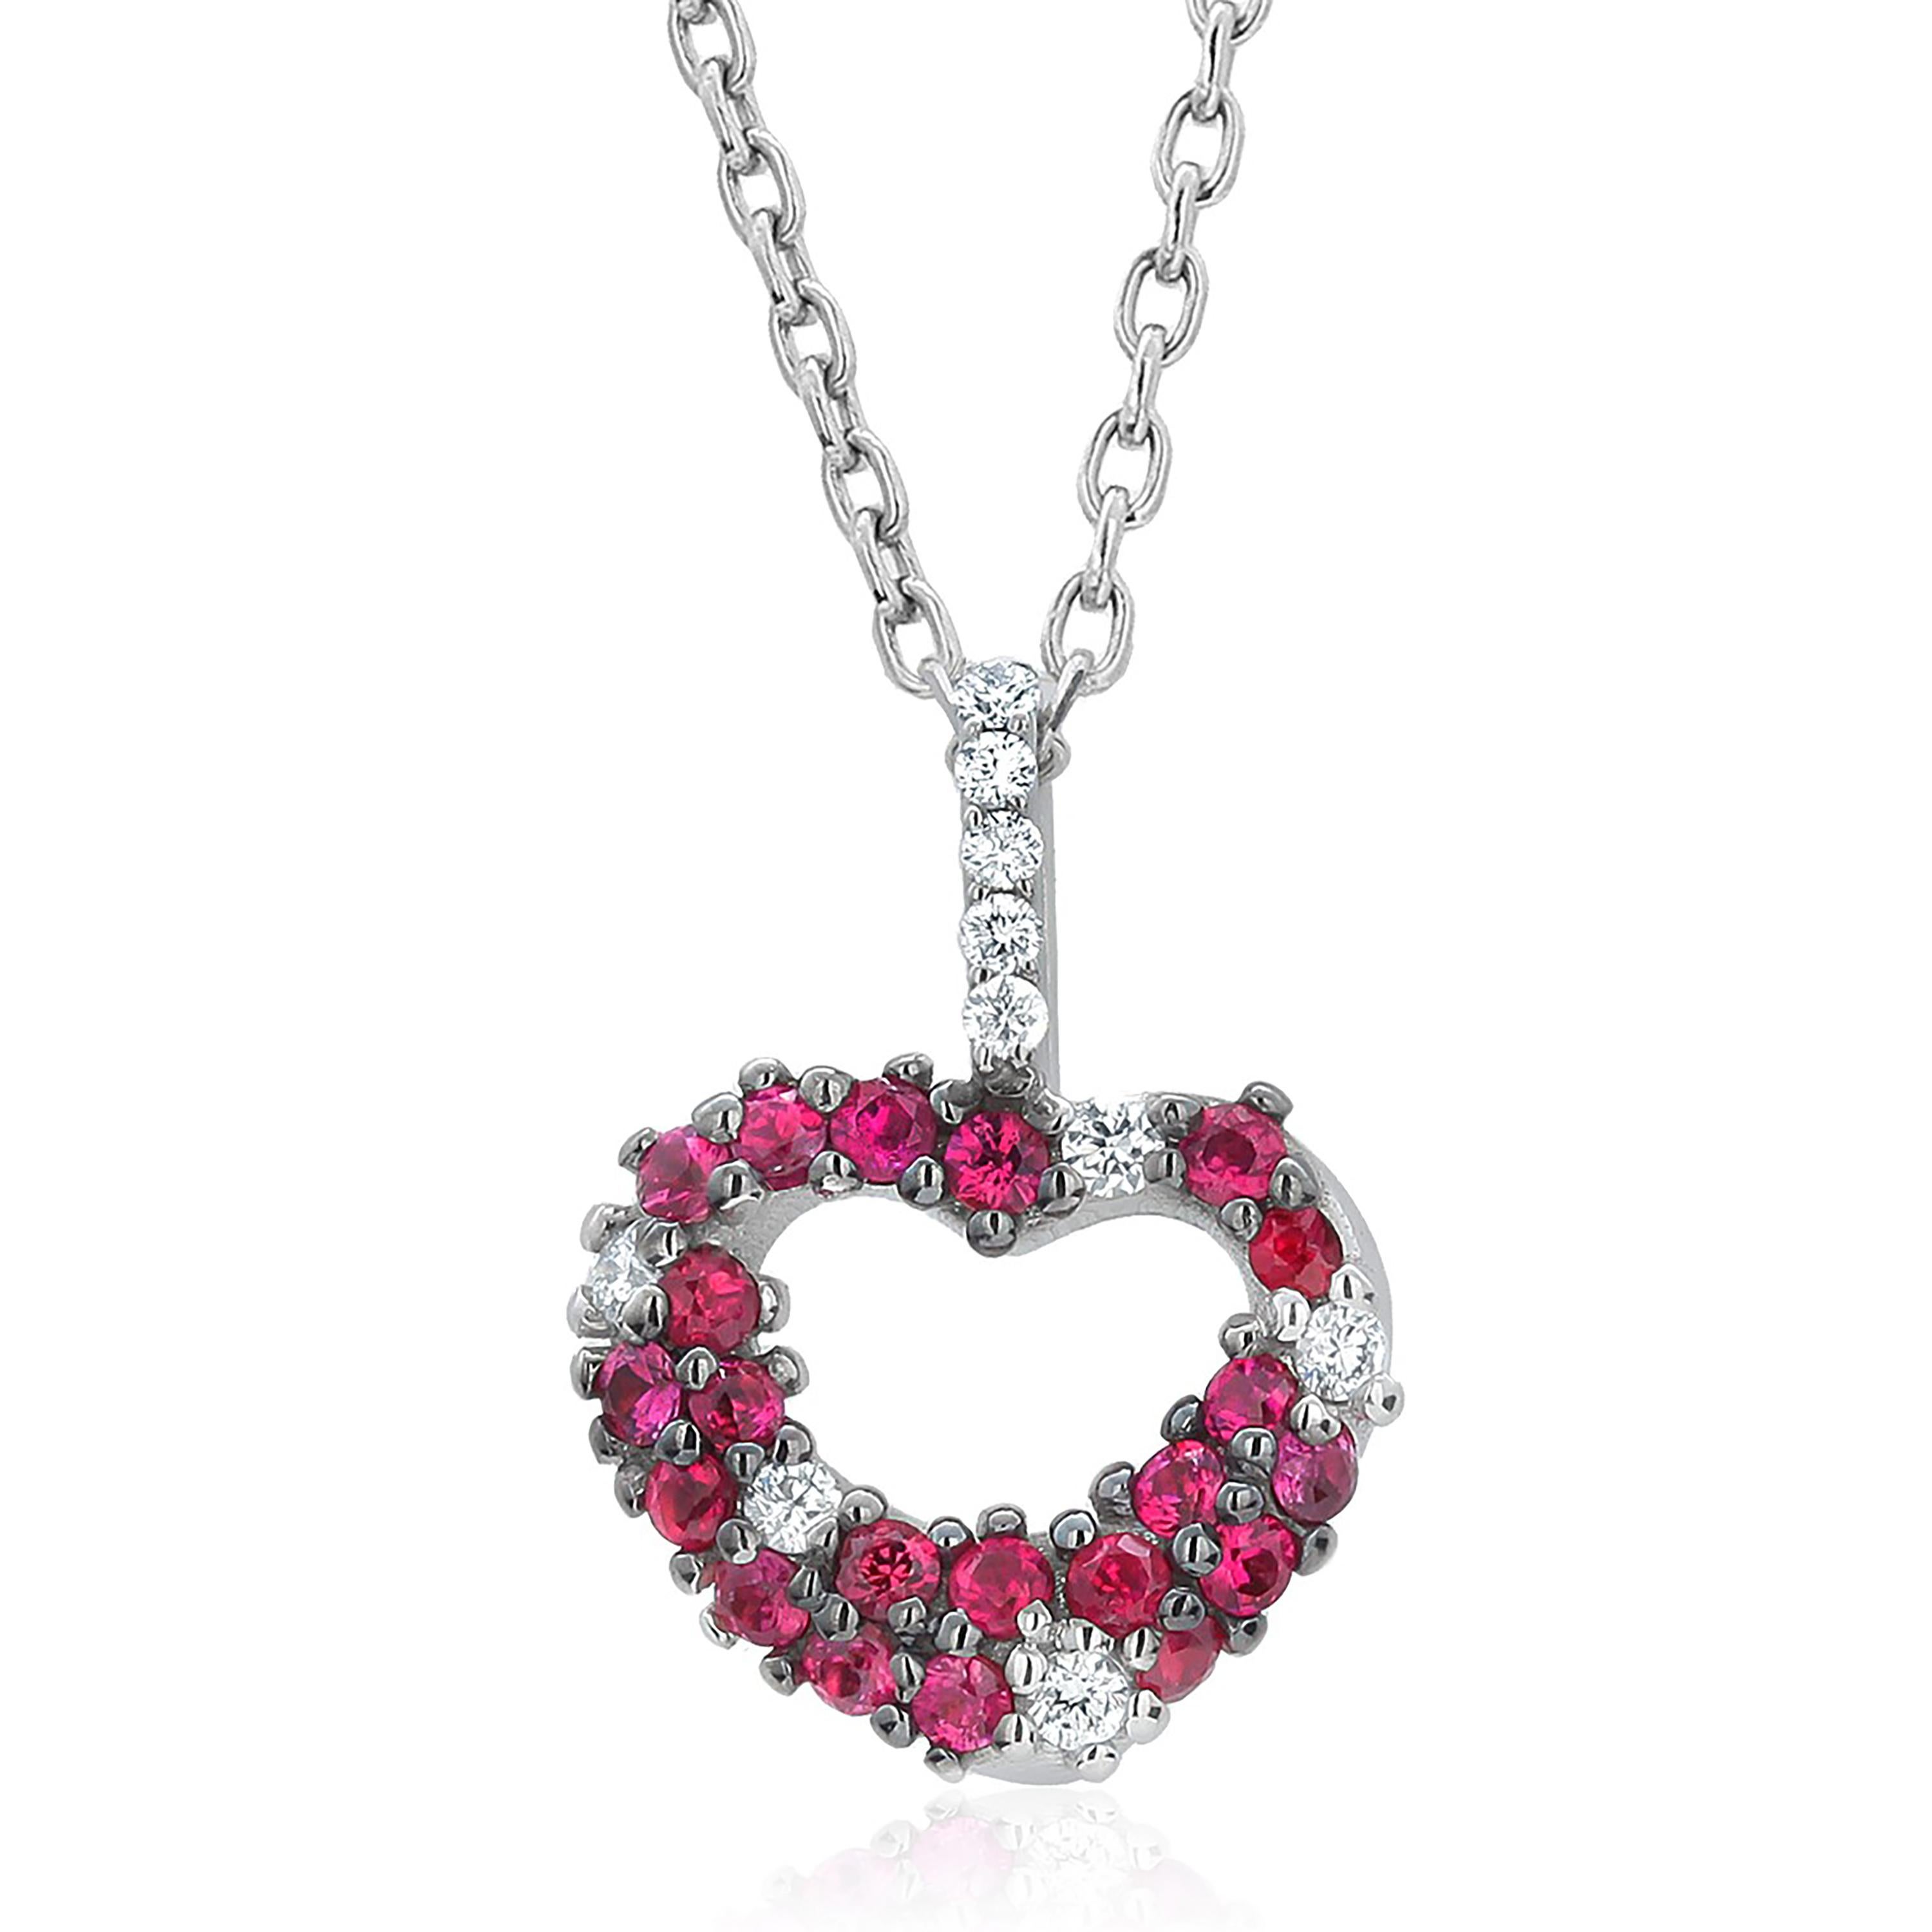 Women's or Men's Ruby and Diamond Puffed Heart Shaped Pendant White Gold Necklace 